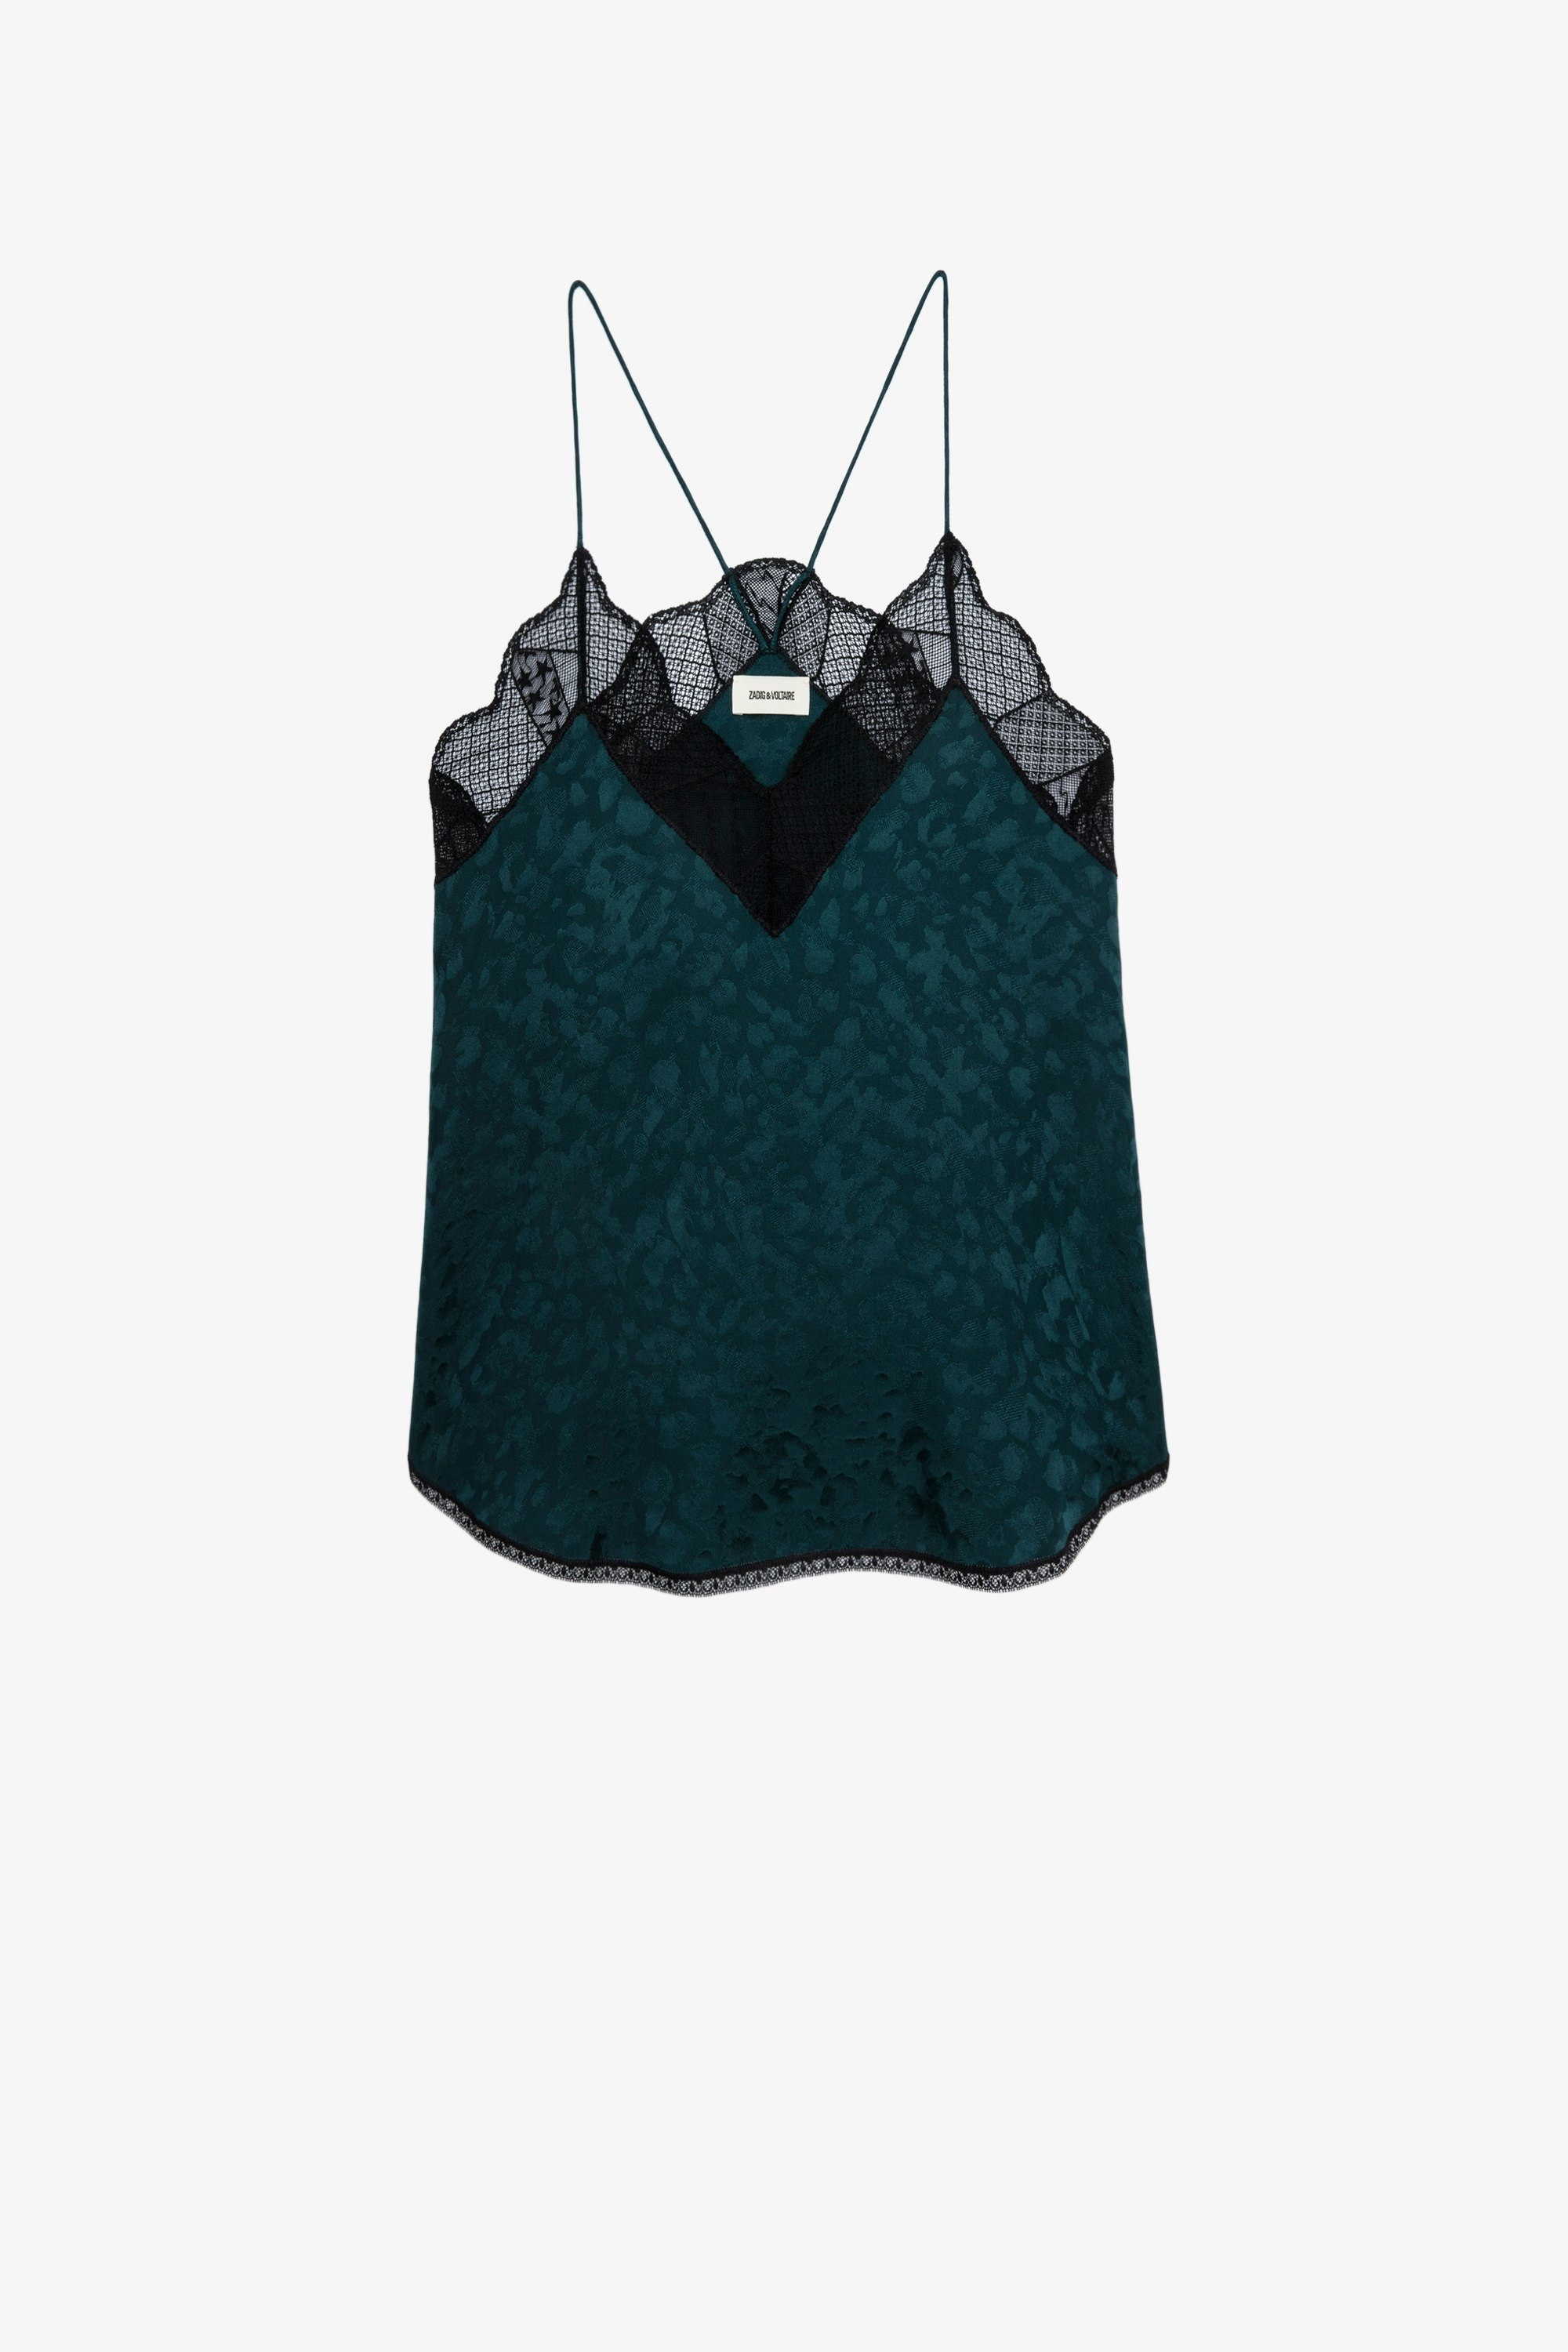 Christy Silk Camisole Green silk camisole with leopard-print jacquard and lace trim